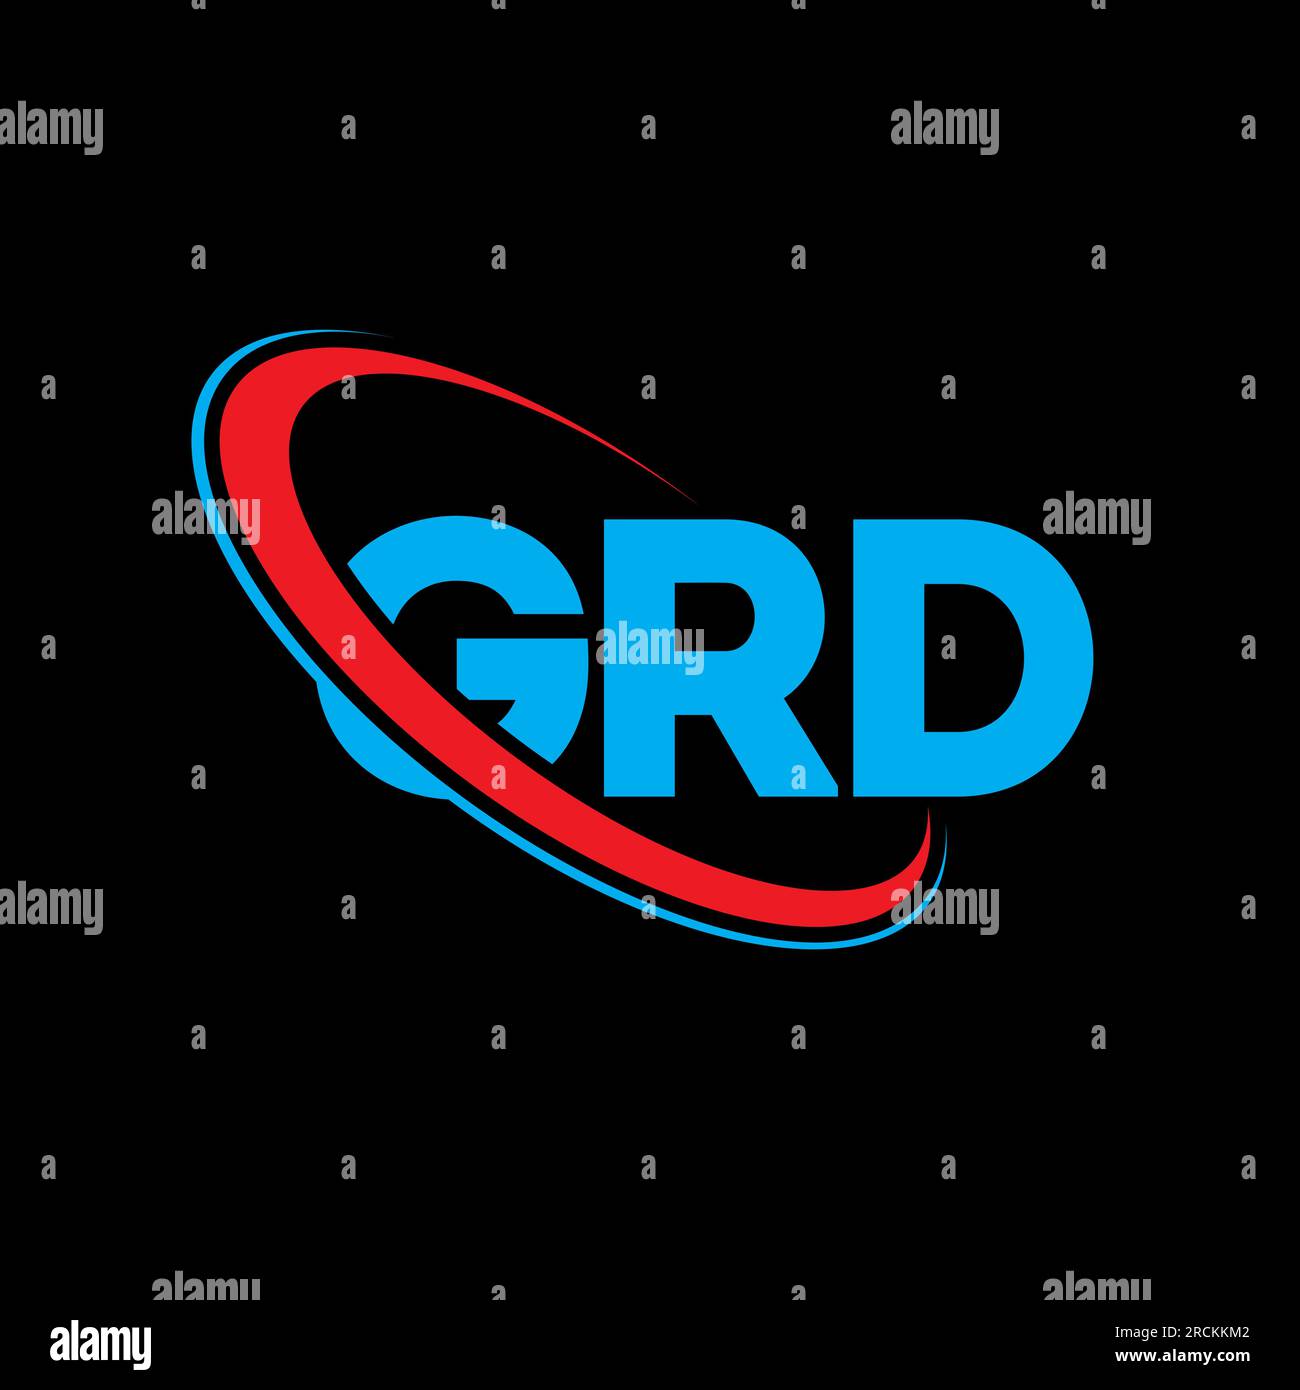 GRD logo. GRD letter. GRD letter logo design. Initials GRD logo linked with circle and uppercase monogram logo. GRD typography for technology, busines Stock Vector